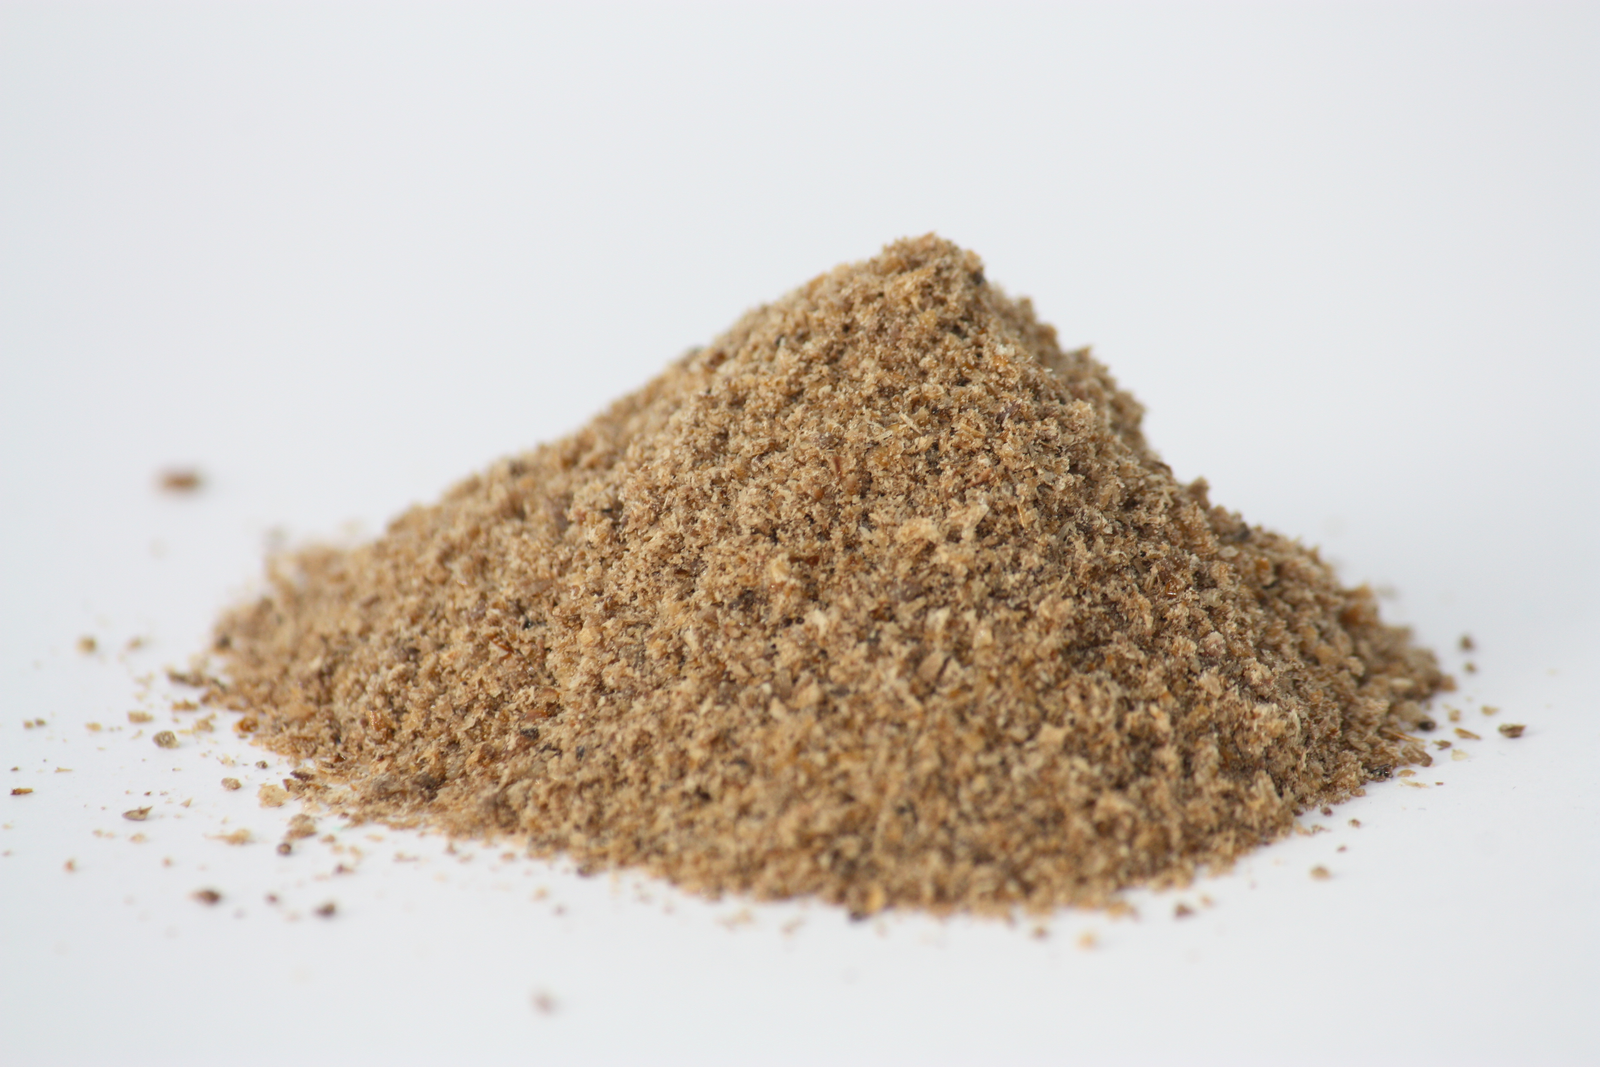 TMP insect meal from mealworms (Tenebrio molitor larvae). <em>Photo: Ynsect</em>